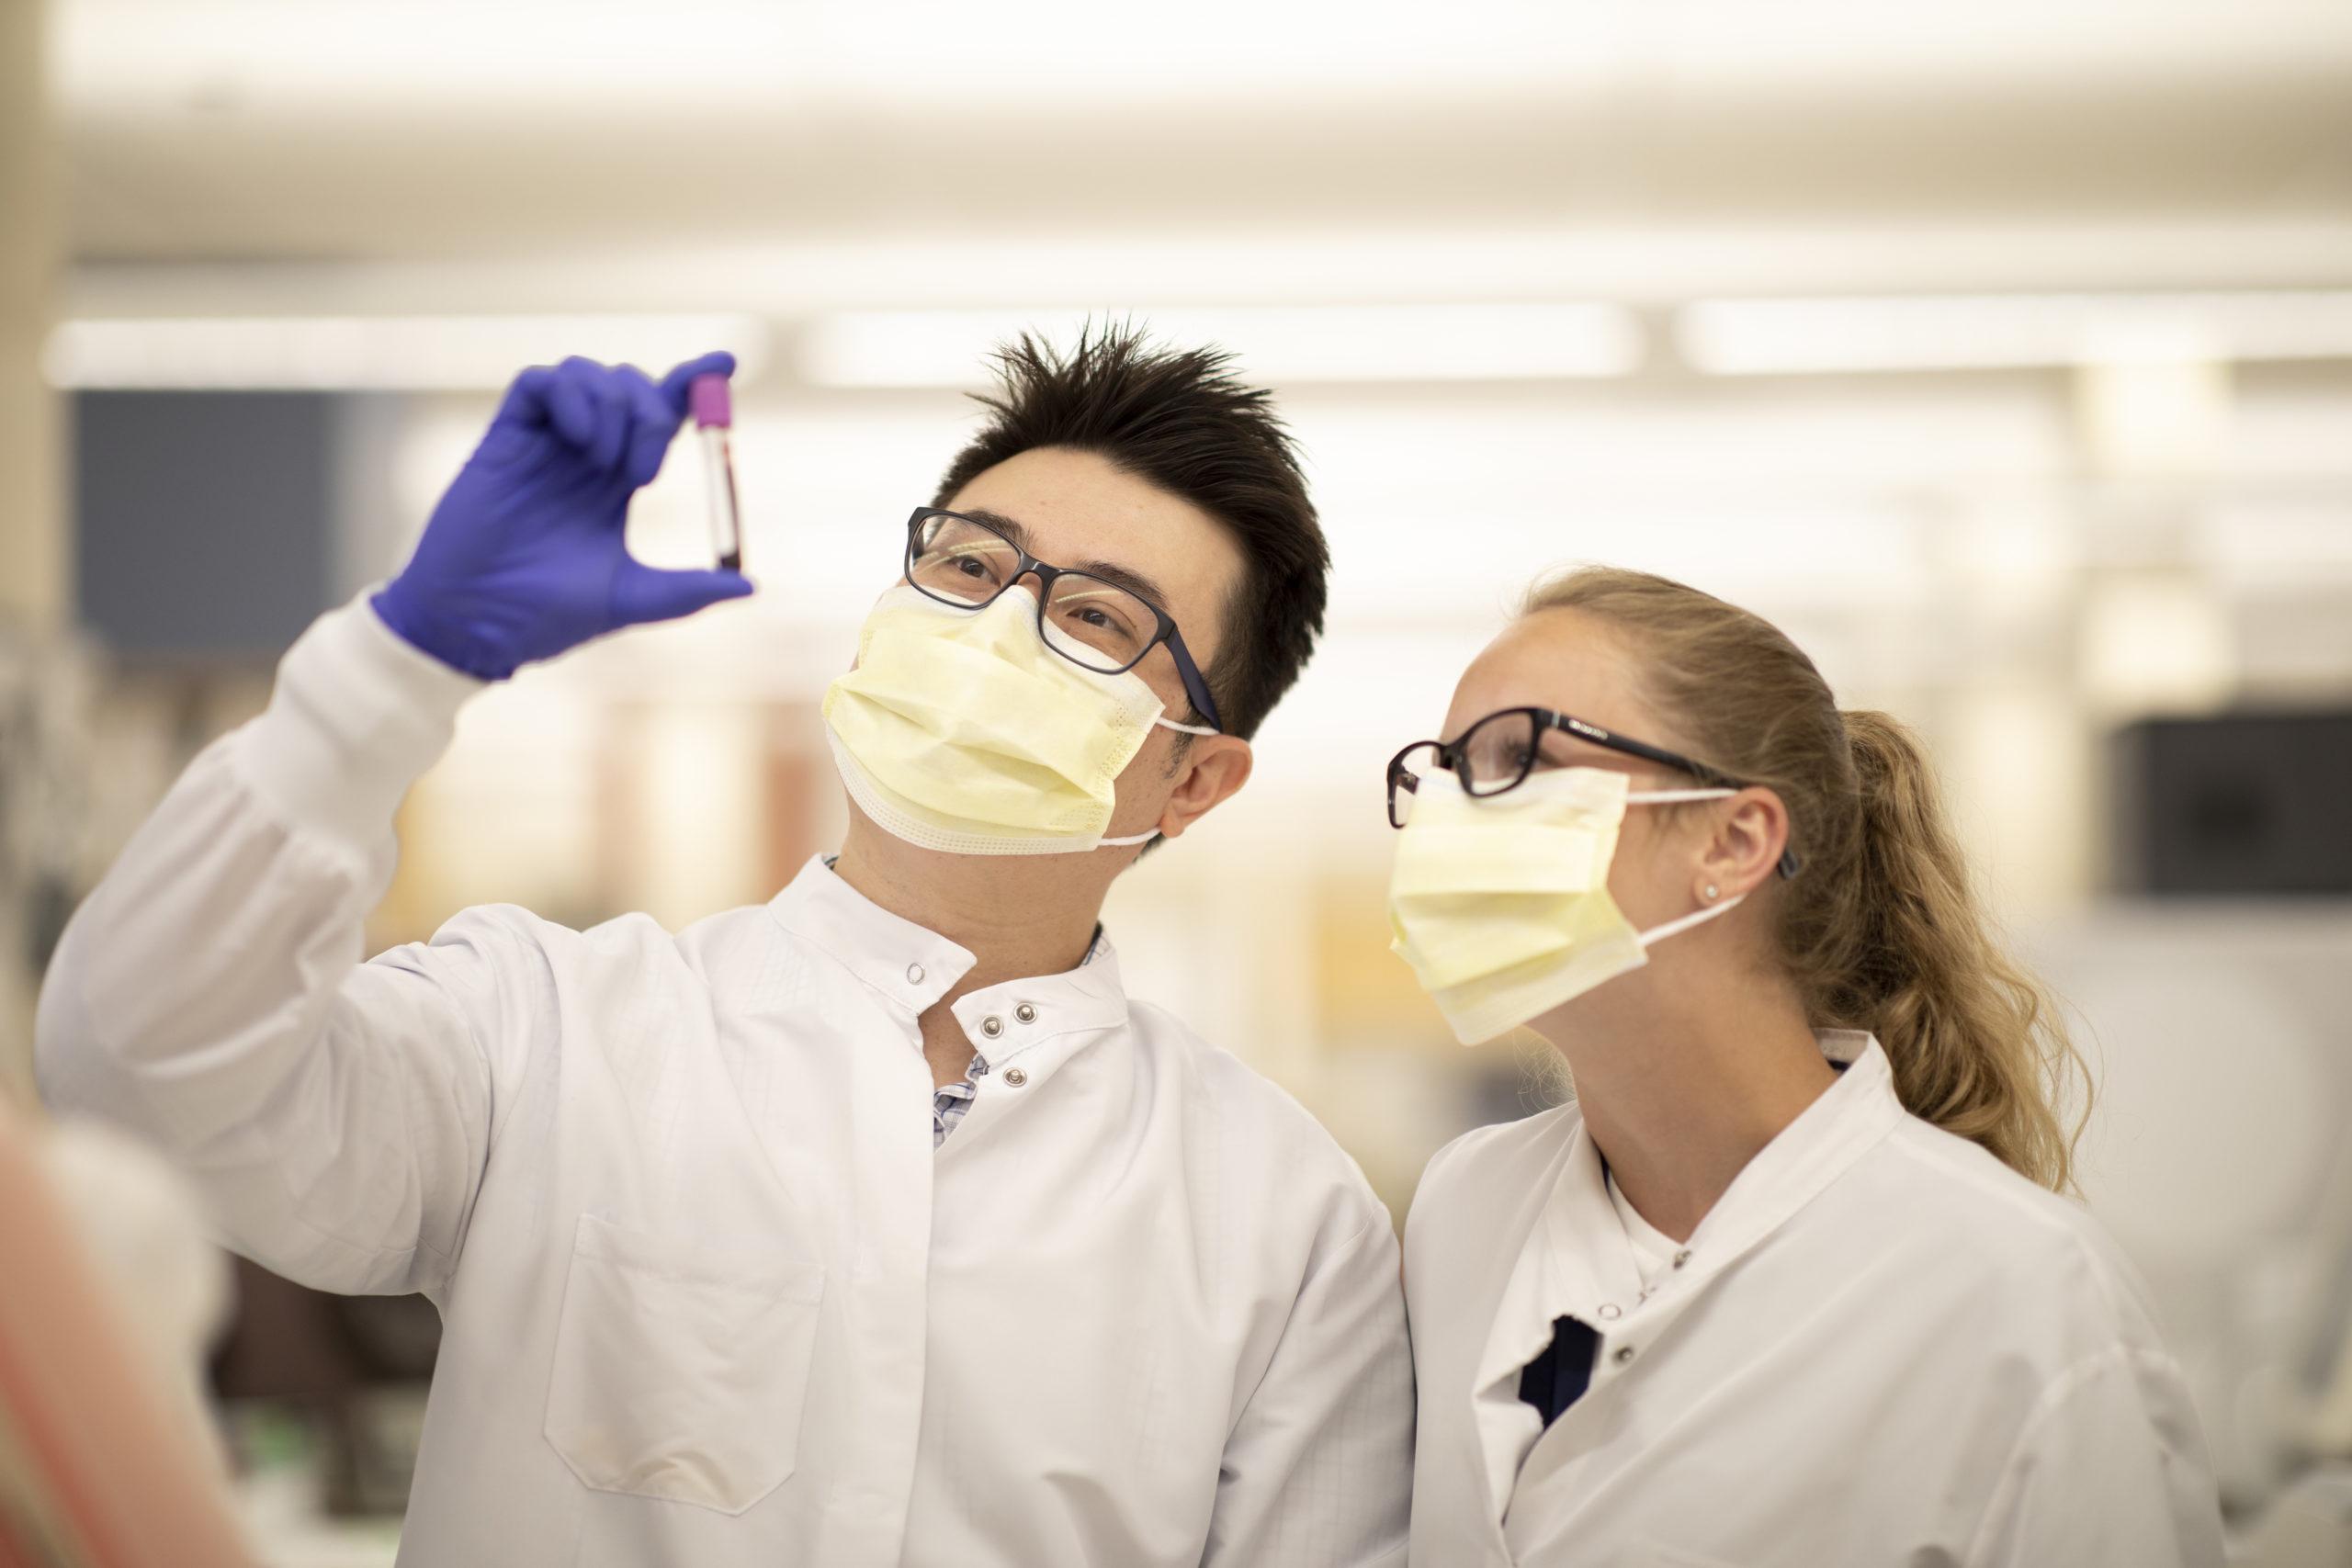 Two people in lab coats and masks examining a test tube sample.